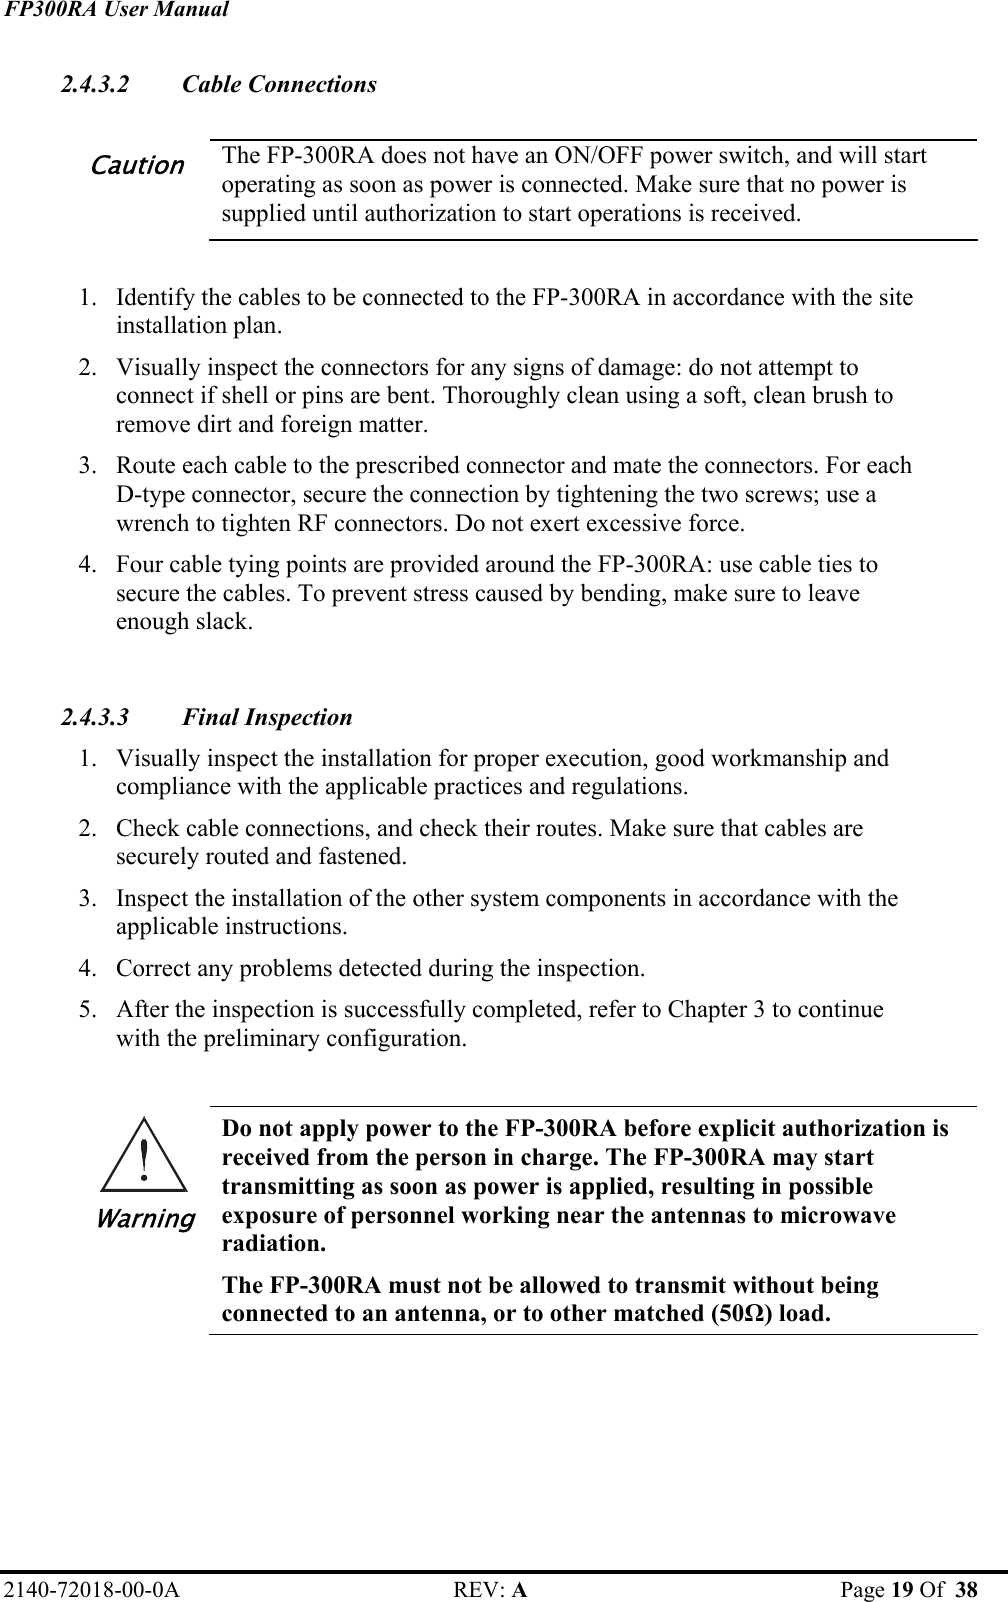 FP300RA User Manual 2140-72018-00-0A REV: A  Page 19 Of  38  2.4.3.2 Cable Connections  Caution The FP-300RA does not have an ON/OFF power switch, and will start operating as soon as power is connected. Make sure that no power is supplied until authorization to start operations is received.  1. Identify the cables to be connected to the FP-300RA in accordance with the site installation plan. 2. Visually inspect the connectors for any signs of damage: do not attempt to connect if shell or pins are bent. Thoroughly clean using a soft, clean brush to remove dirt and foreign matter. 3. Route each cable to the prescribed connector and mate the connectors. For each D-type connector, secure the connection by tightening the two screws; use a wrench to tighten RF connectors. Do not exert excessive force. 4. Four cable tying points are provided around the FP-300RA: use cable ties to secure the cables. To prevent stress caused by bending, make sure to leave enough slack.  2.4.3.3 Final Inspection 1. Visually inspect the installation for proper execution, good workmanship and compliance with the applicable practices and regulations. 2. Check cable connections, and check their routes. Make sure that cables are securely routed and fastened. 3. Inspect the installation of the other system components in accordance with the applicable instructions. 4. Correct any problems detected during the inspection.  5. After the inspection is successfully completed, refer to Chapter 3 to continue with the preliminary configuration.  Warning Do not apply power to the FP-300RA before explicit authorization is received from the person in charge. The FP-300RA may start transmitting as soon as power is applied, resulting in possible exposure of personnel working near the antennas to microwave radiation.  The FP-300RA must not be allowed to transmit without being connected to an antenna, or to other matched (50Ω) load.   